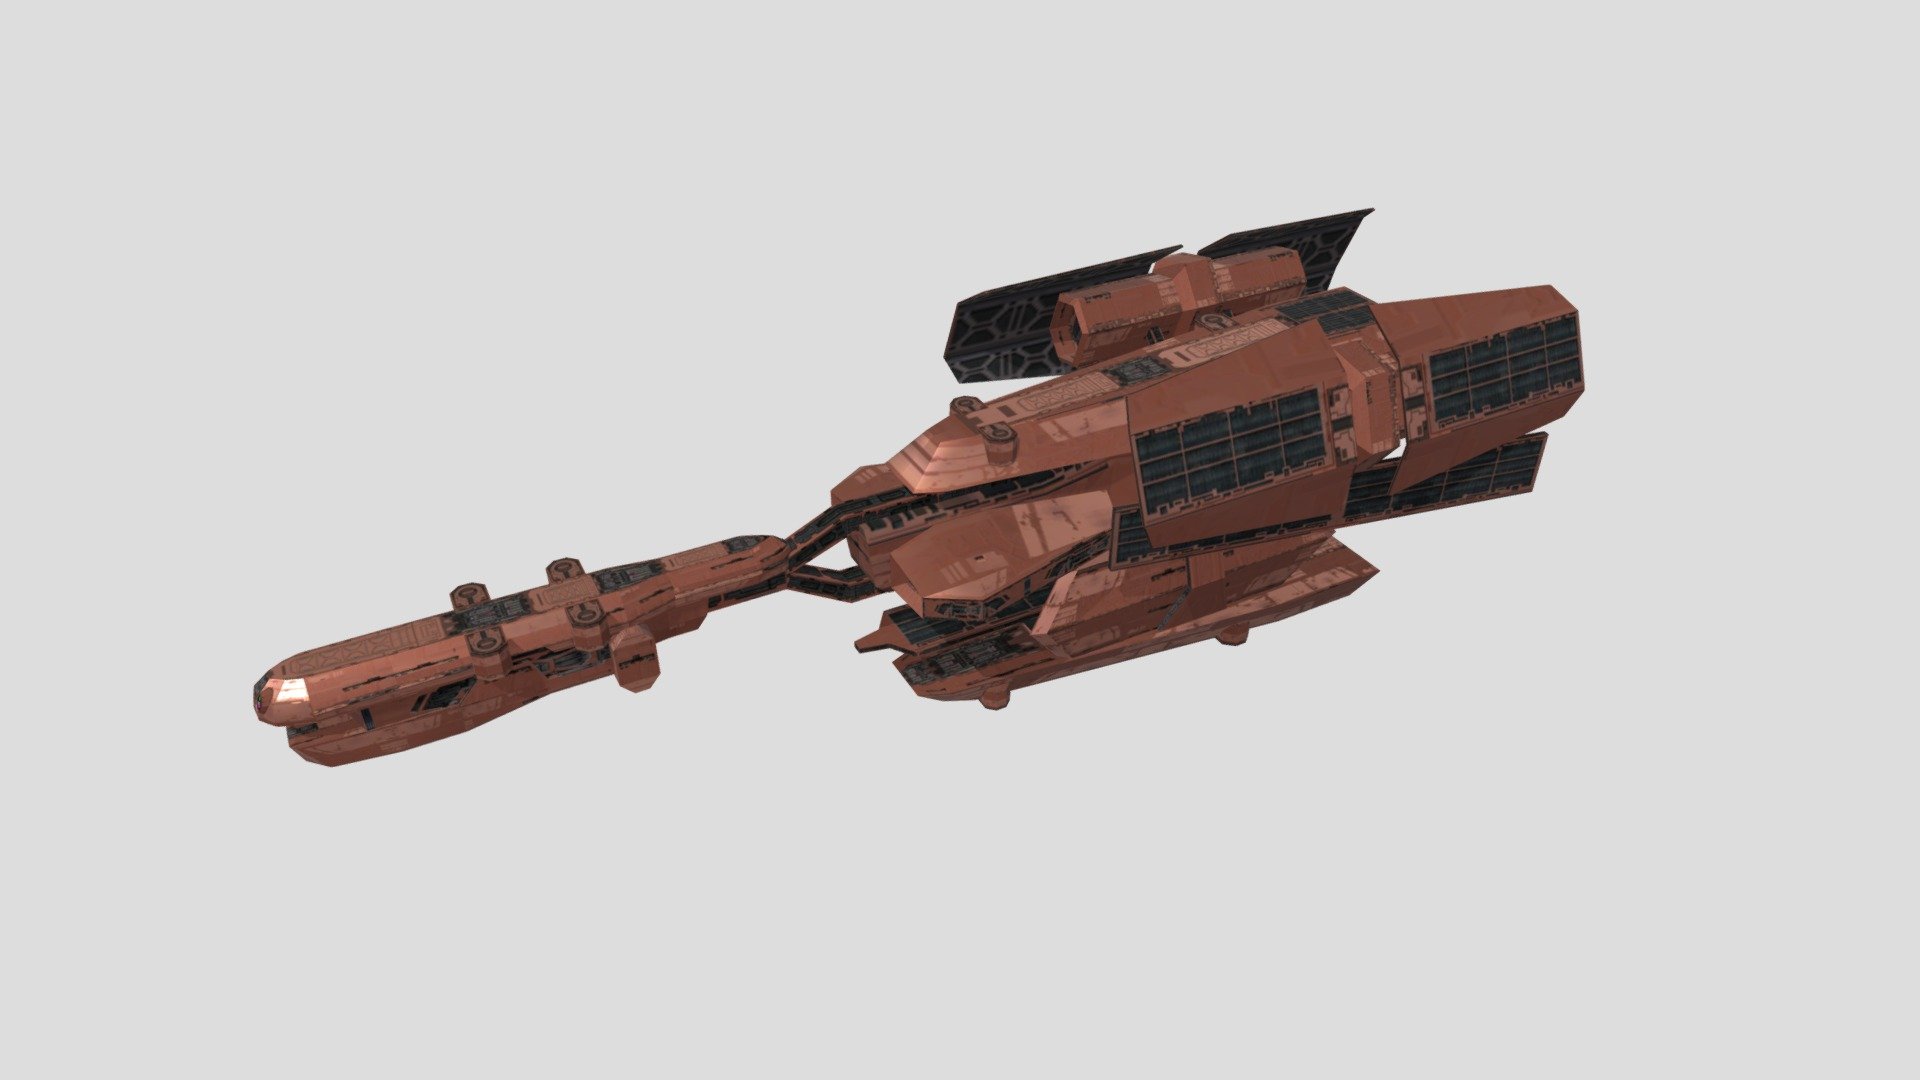 Star Fox Command Ship Models Released